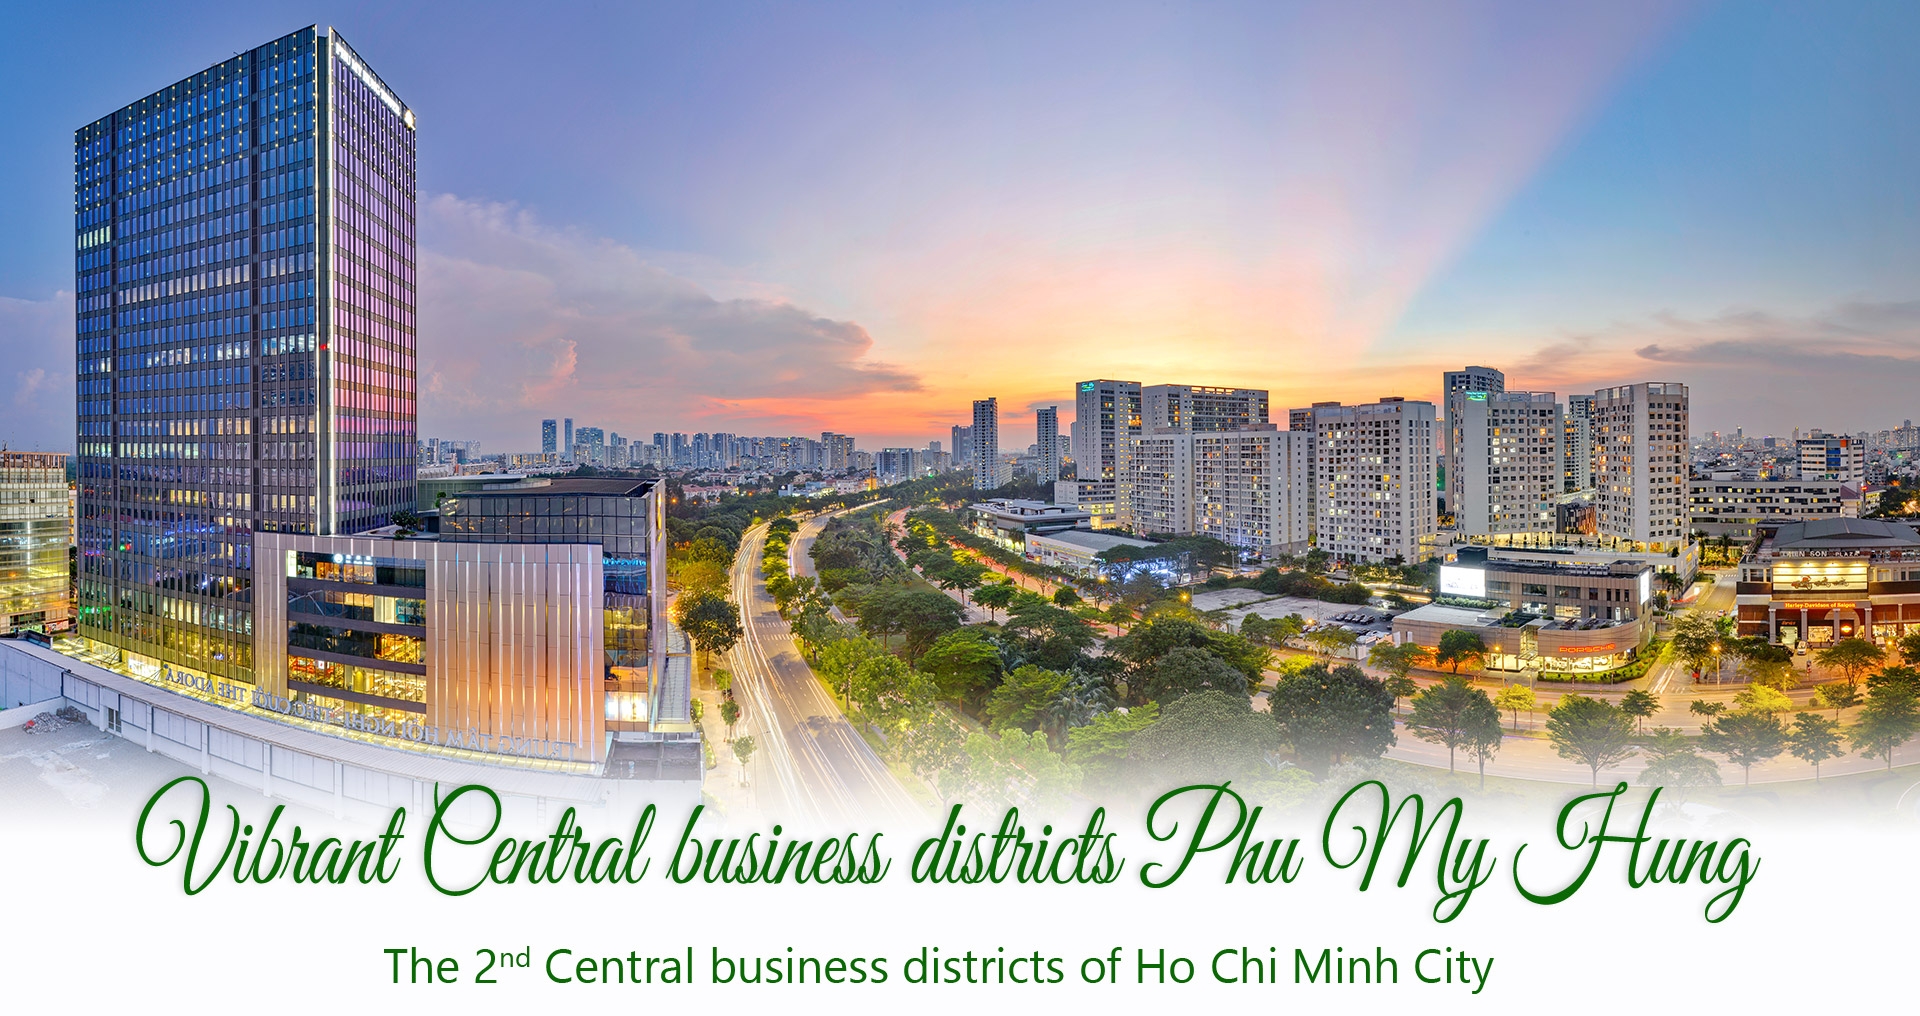 vibrant central business districts phu my hung the 2nd central business districts of ho chi minh city